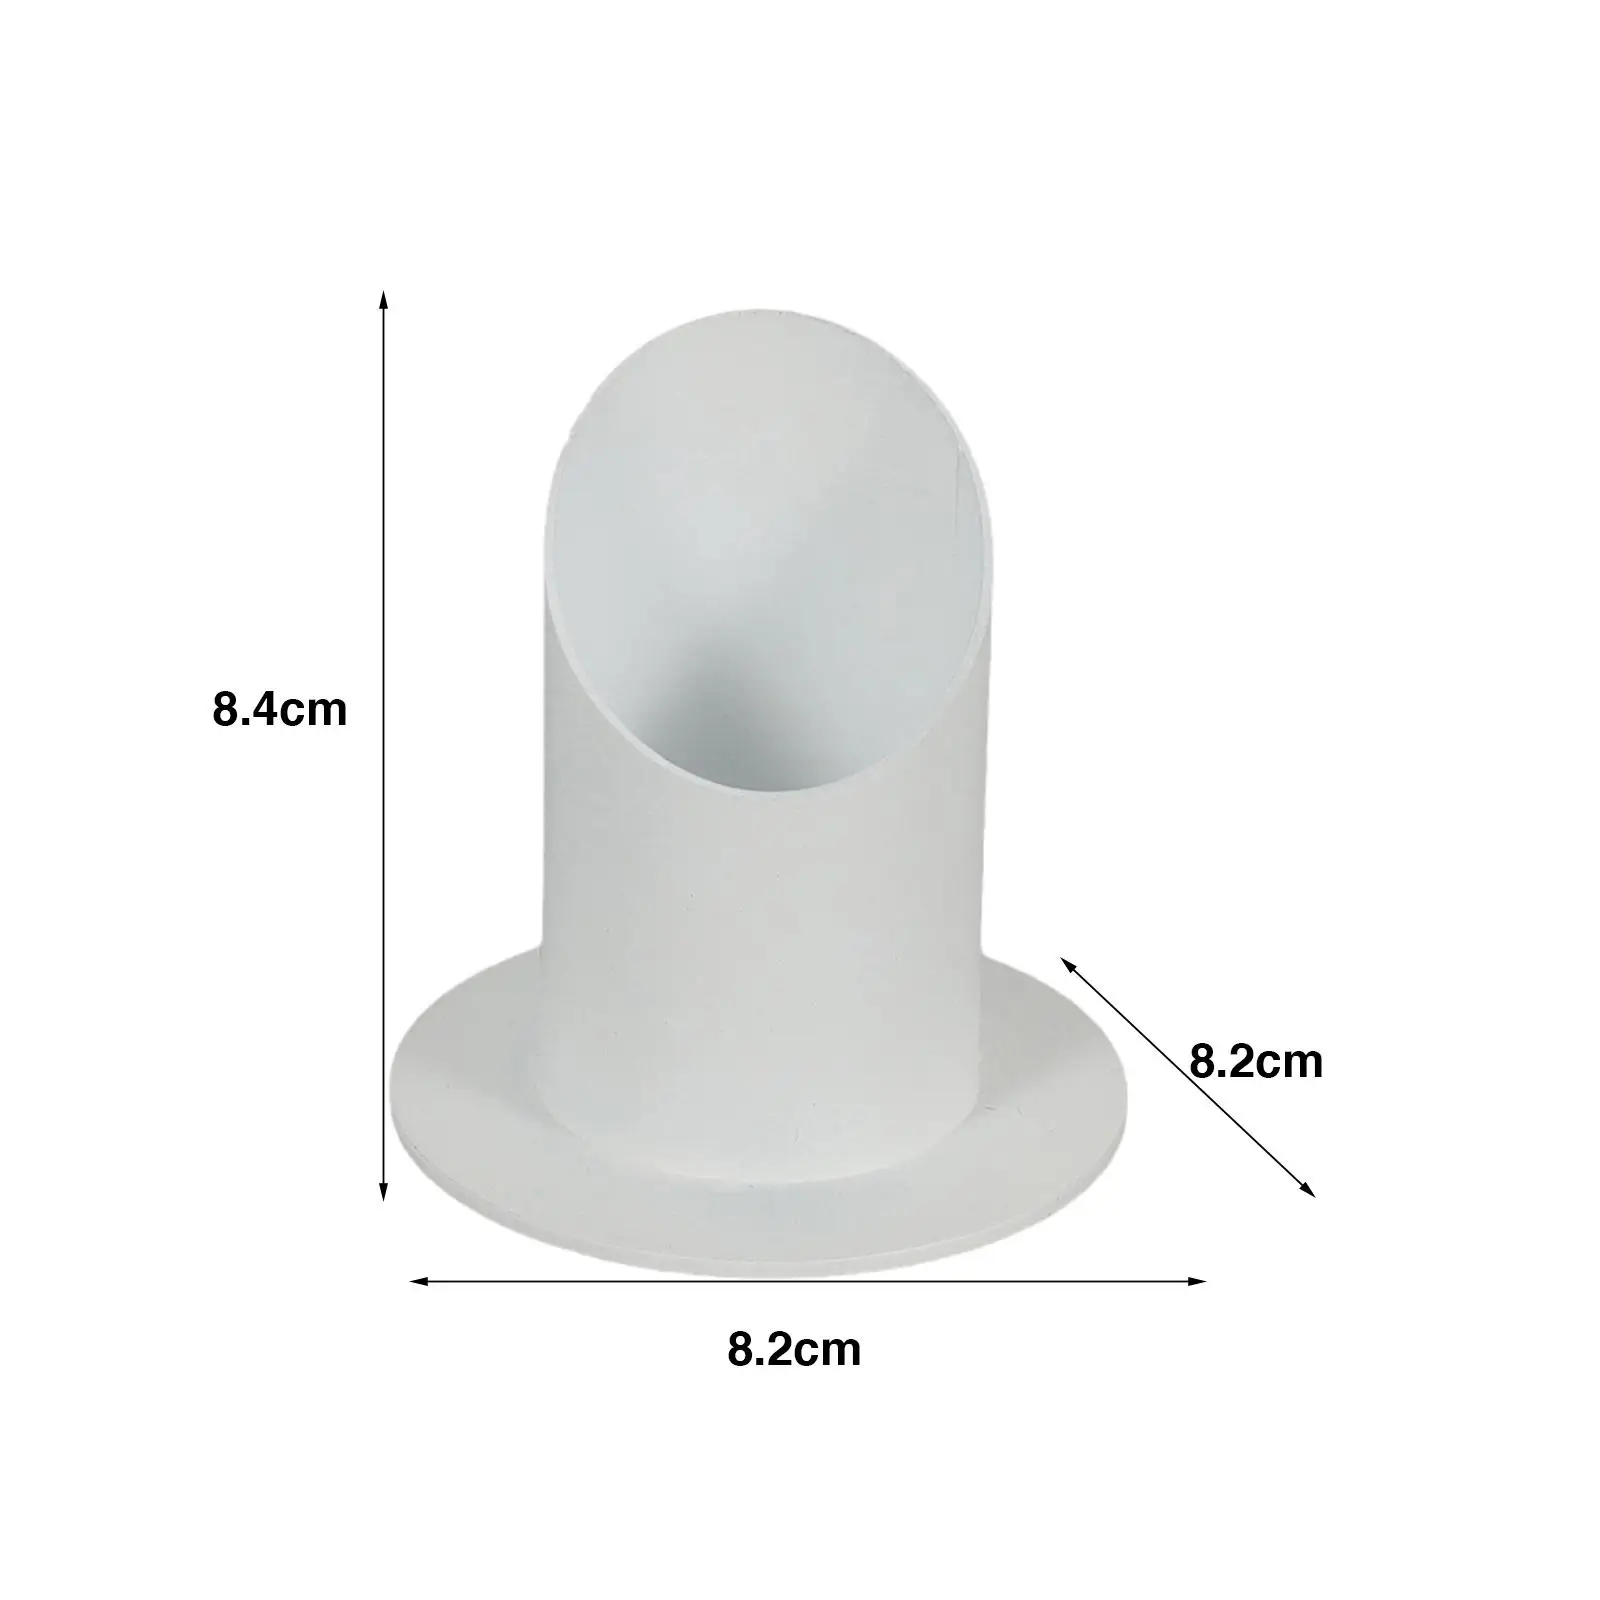 Candle Holder for 4 cm Communion Candle Candleholder Pillar Candles Stand for